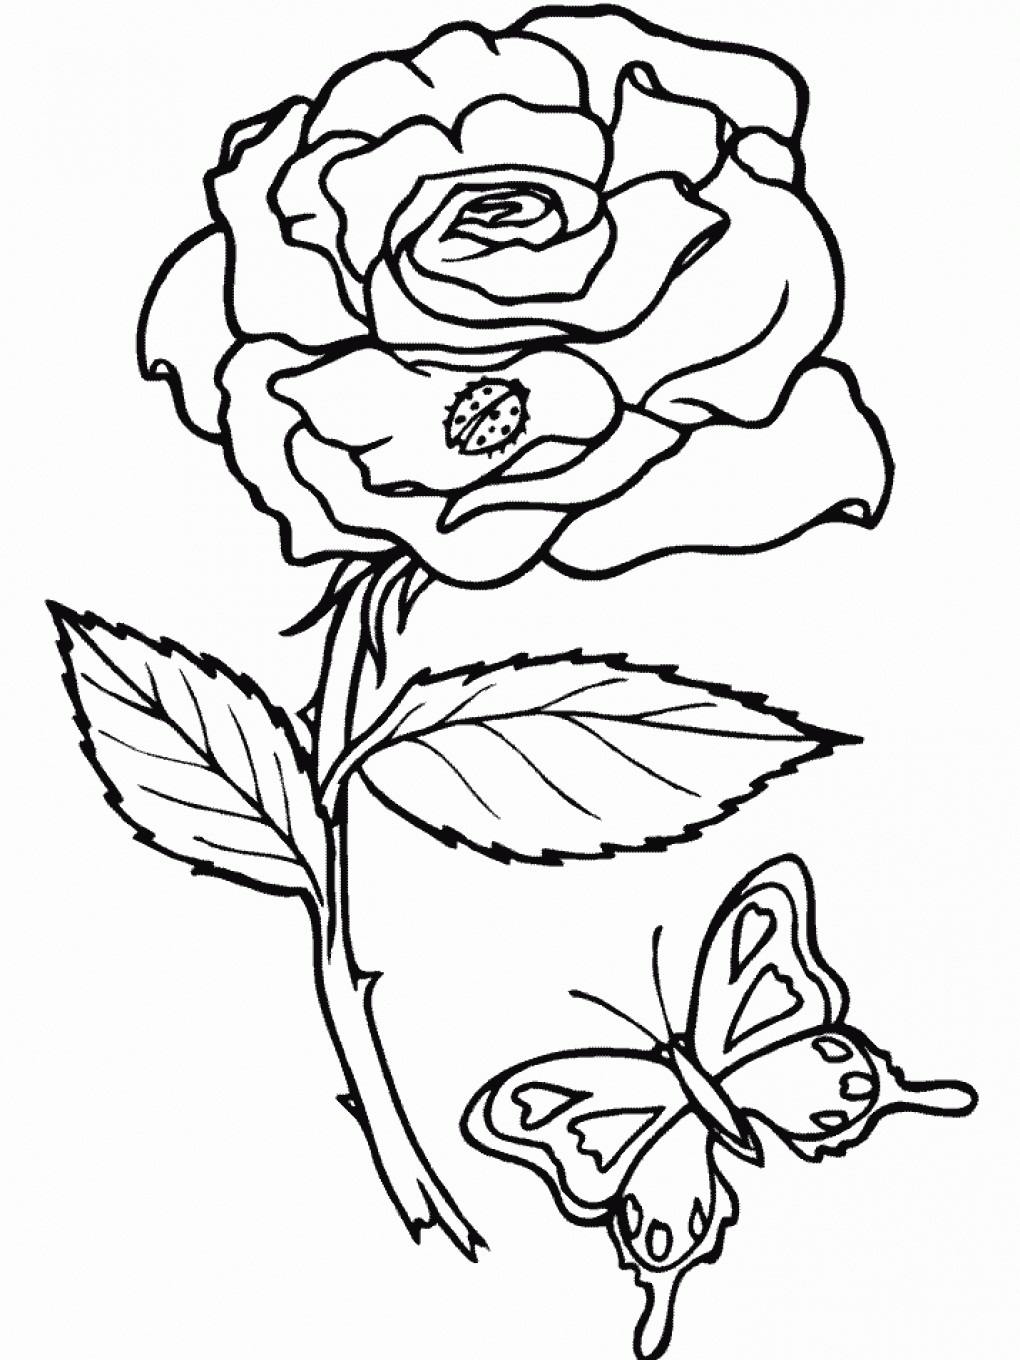 Rose And Butterfly Coloring Page   Free Printable Coloring Pages ...